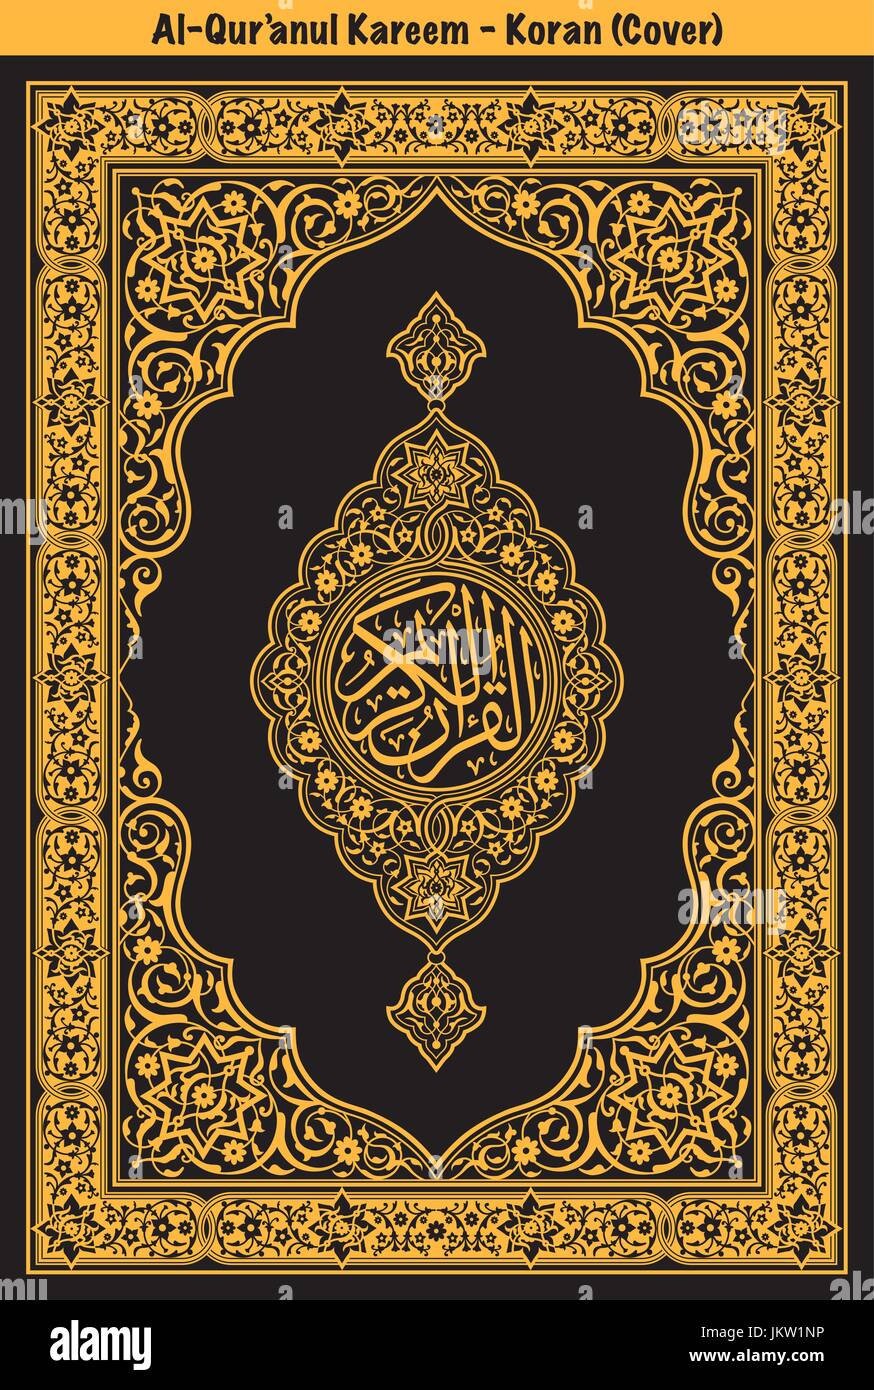 Quran Cover High Resolution Stock Photography and Images ...